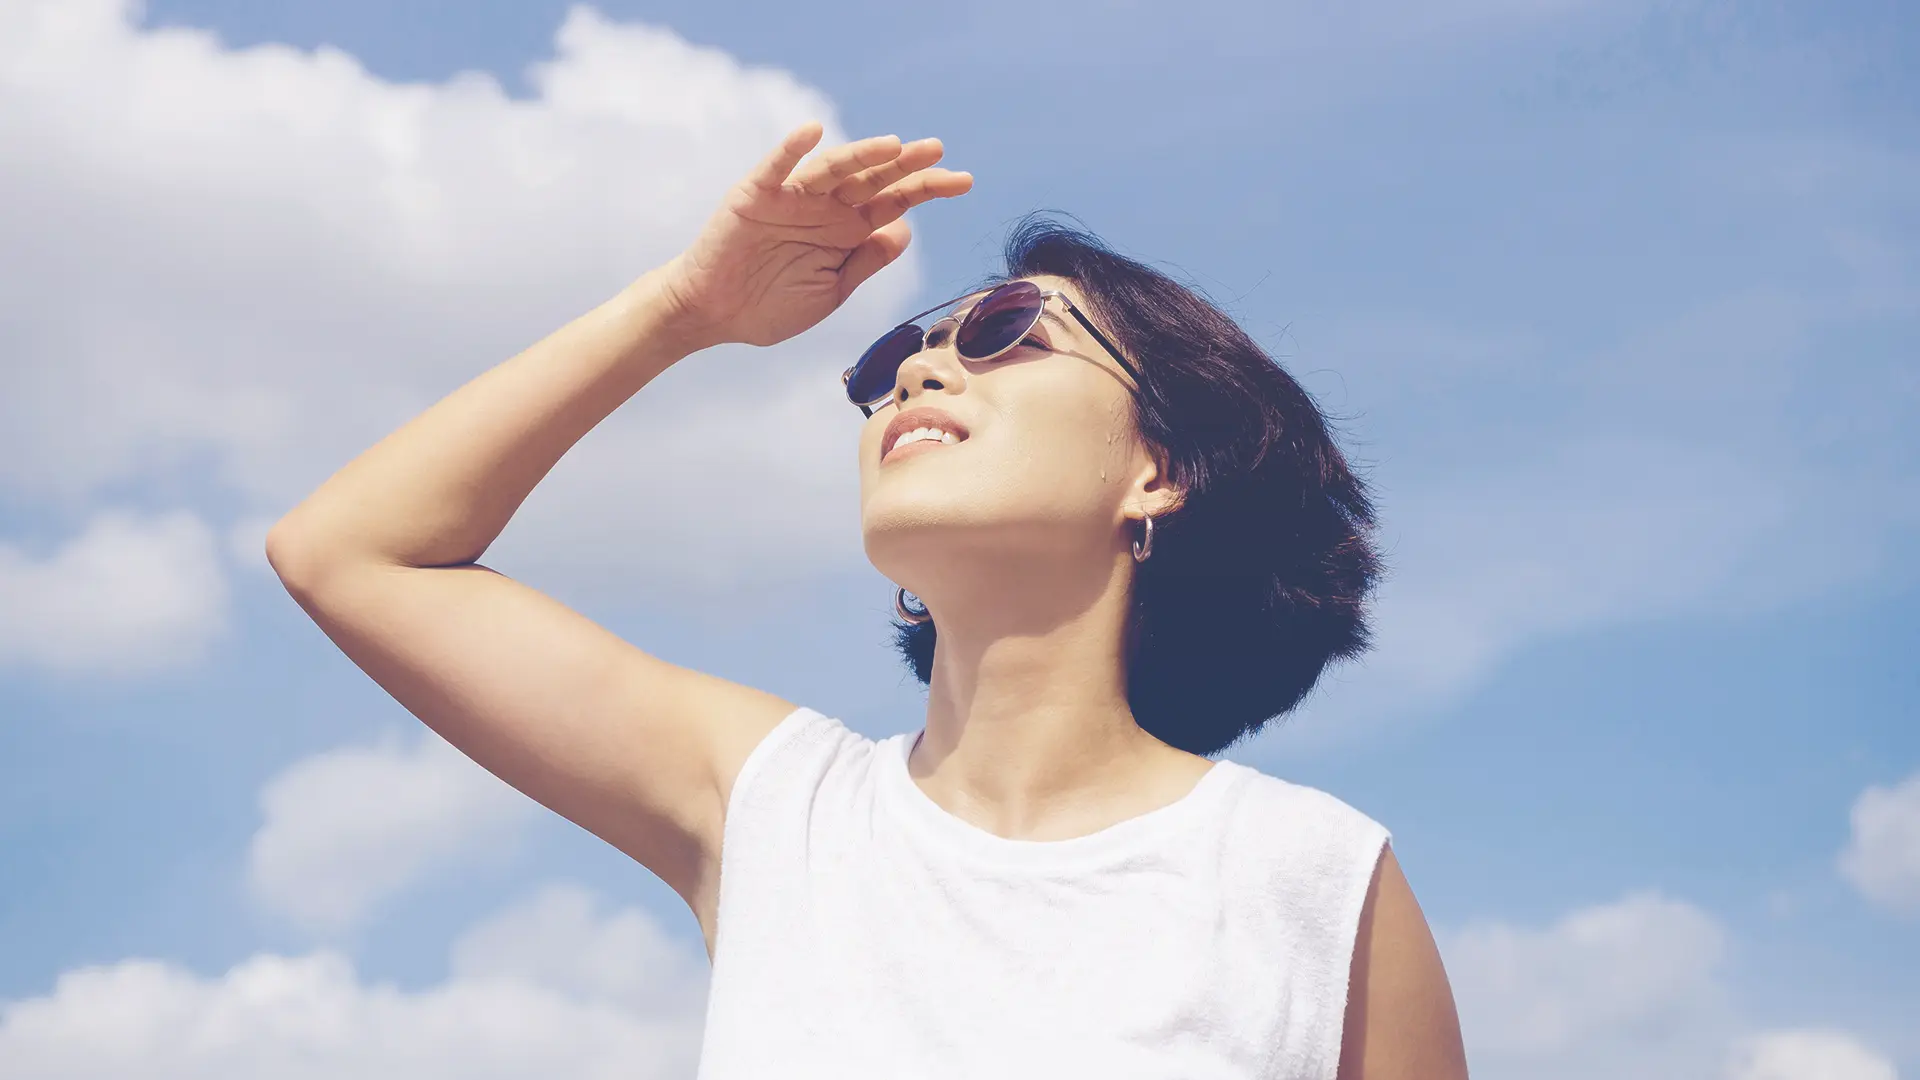 5 Reasons “Cloud Watching” Can Make You a Better Leader